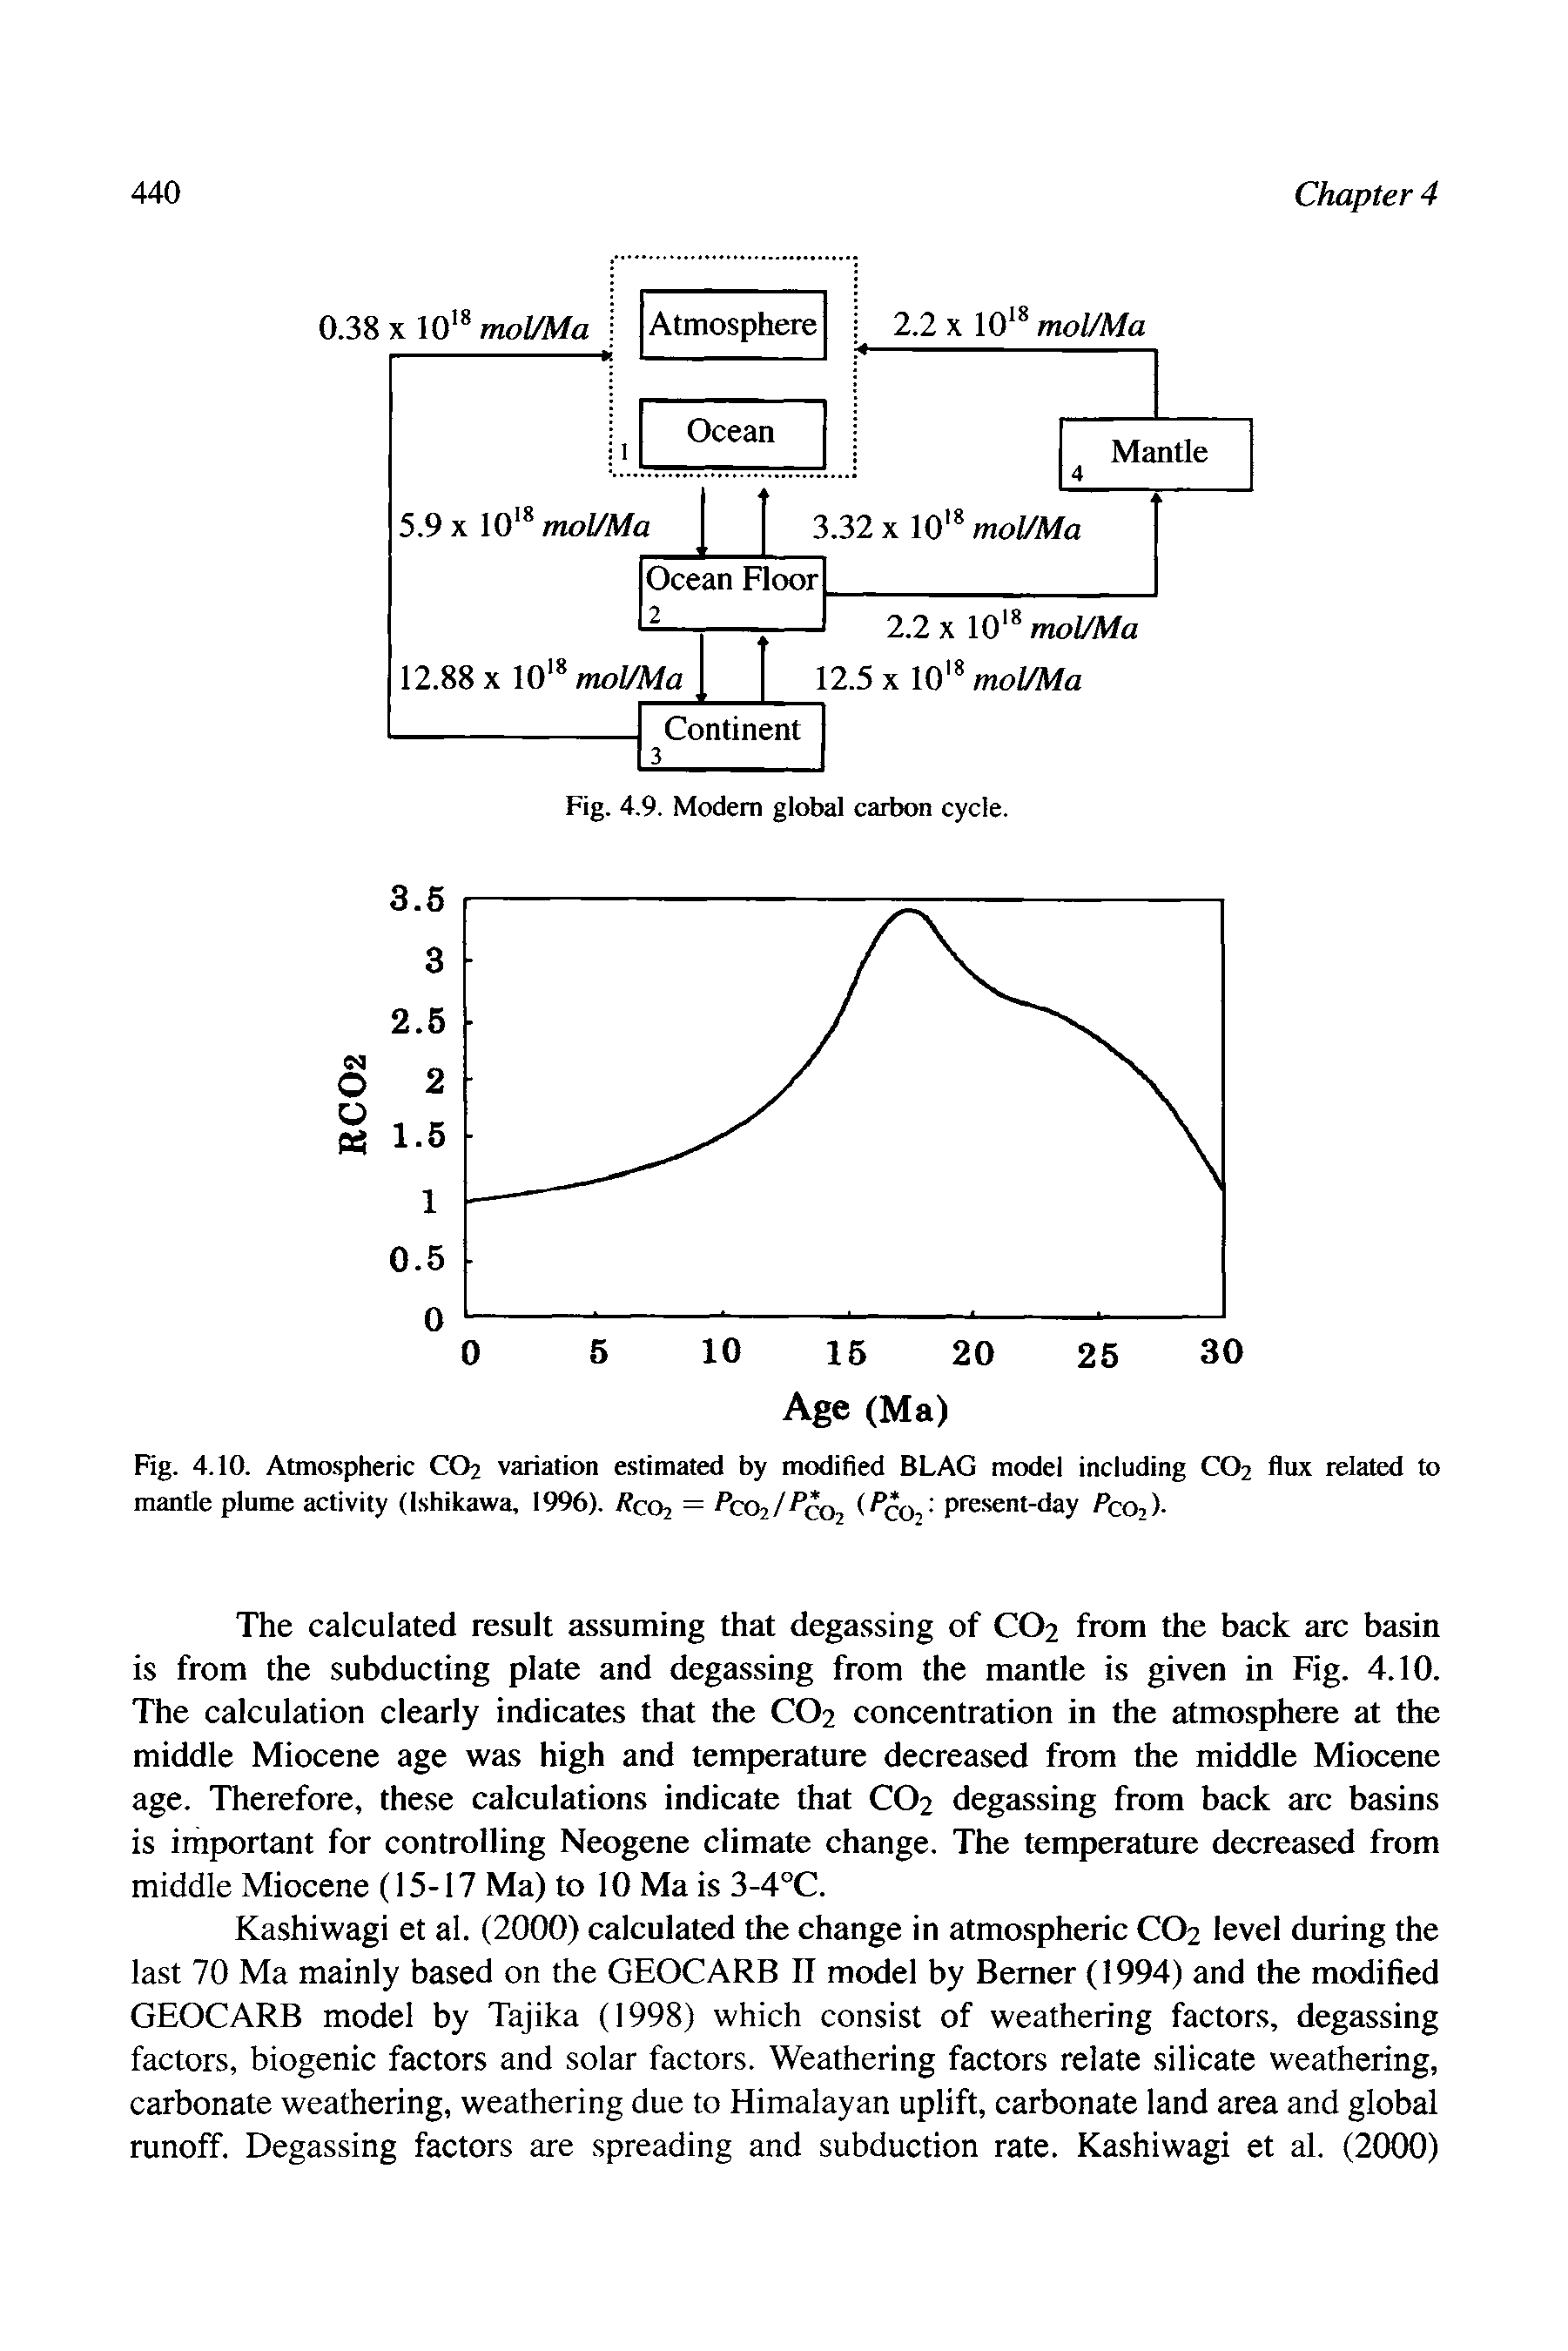 Fig. 4.10. Atmo.spheric CO2 variation estimated by modified BLAG model including CO2 flux related to mantle plume activity (Ishikawa, 1996). t c02 = 202/ 002 - prescut-day PcOi)-...